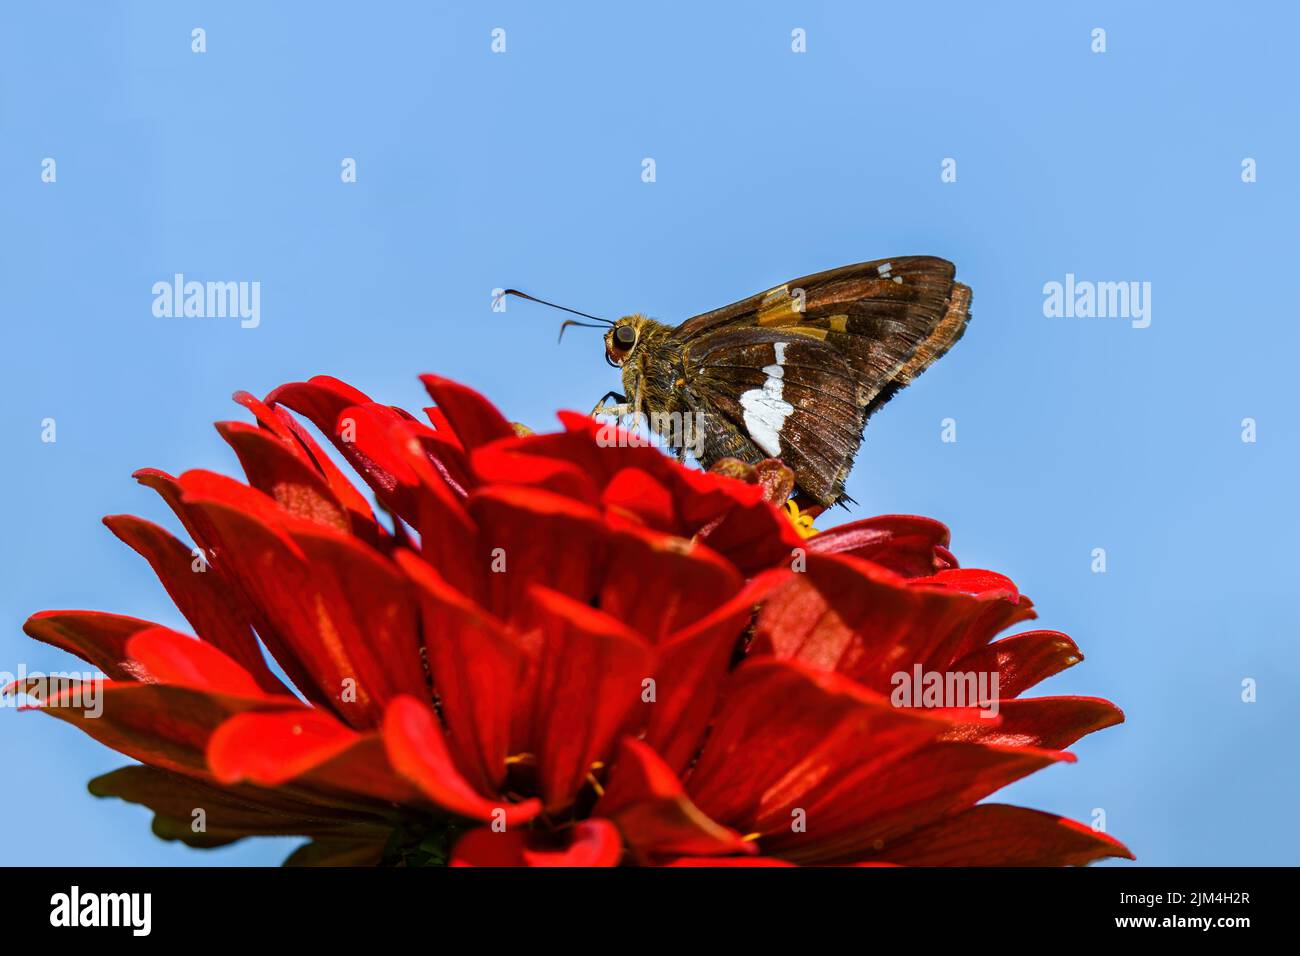 Silver-spotted skipper butterfly or Epargyreus clarus on Zinnia flower. It is small- to medium-sized species of family Hesperiidae. Stock Photo